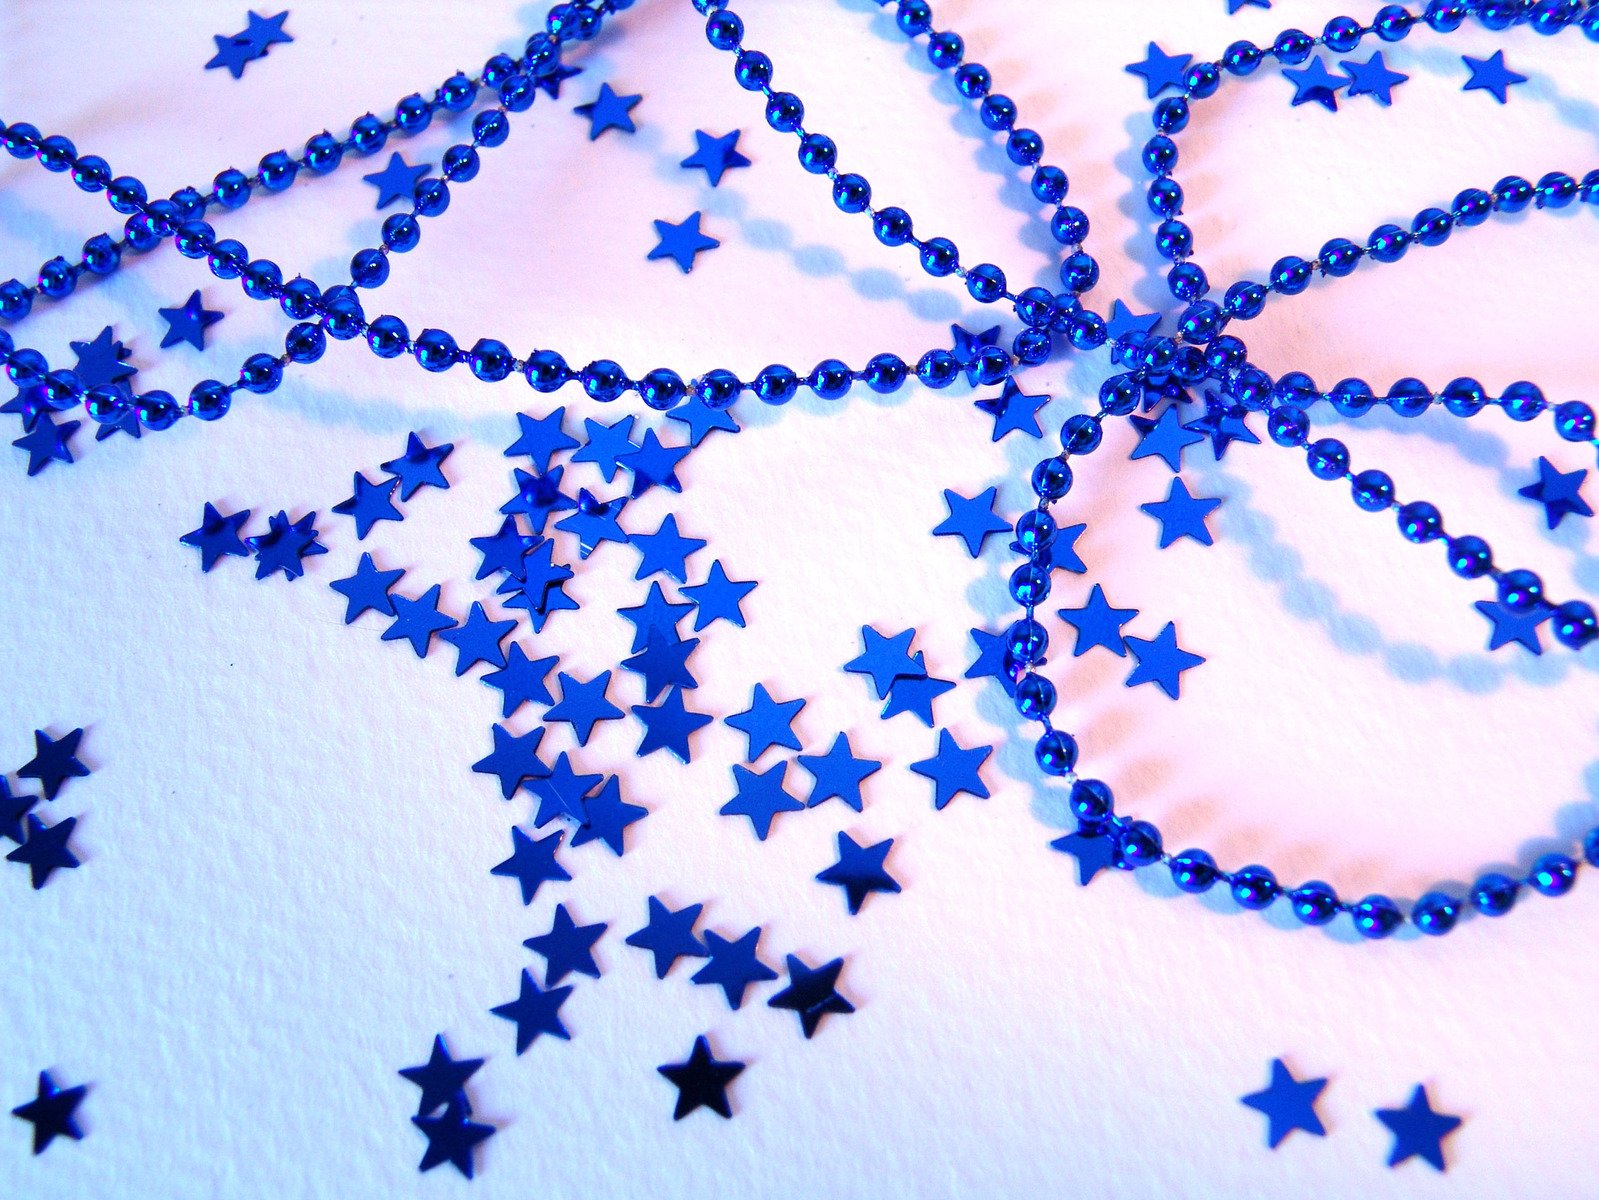 this is a colorful pograph of beads and stars